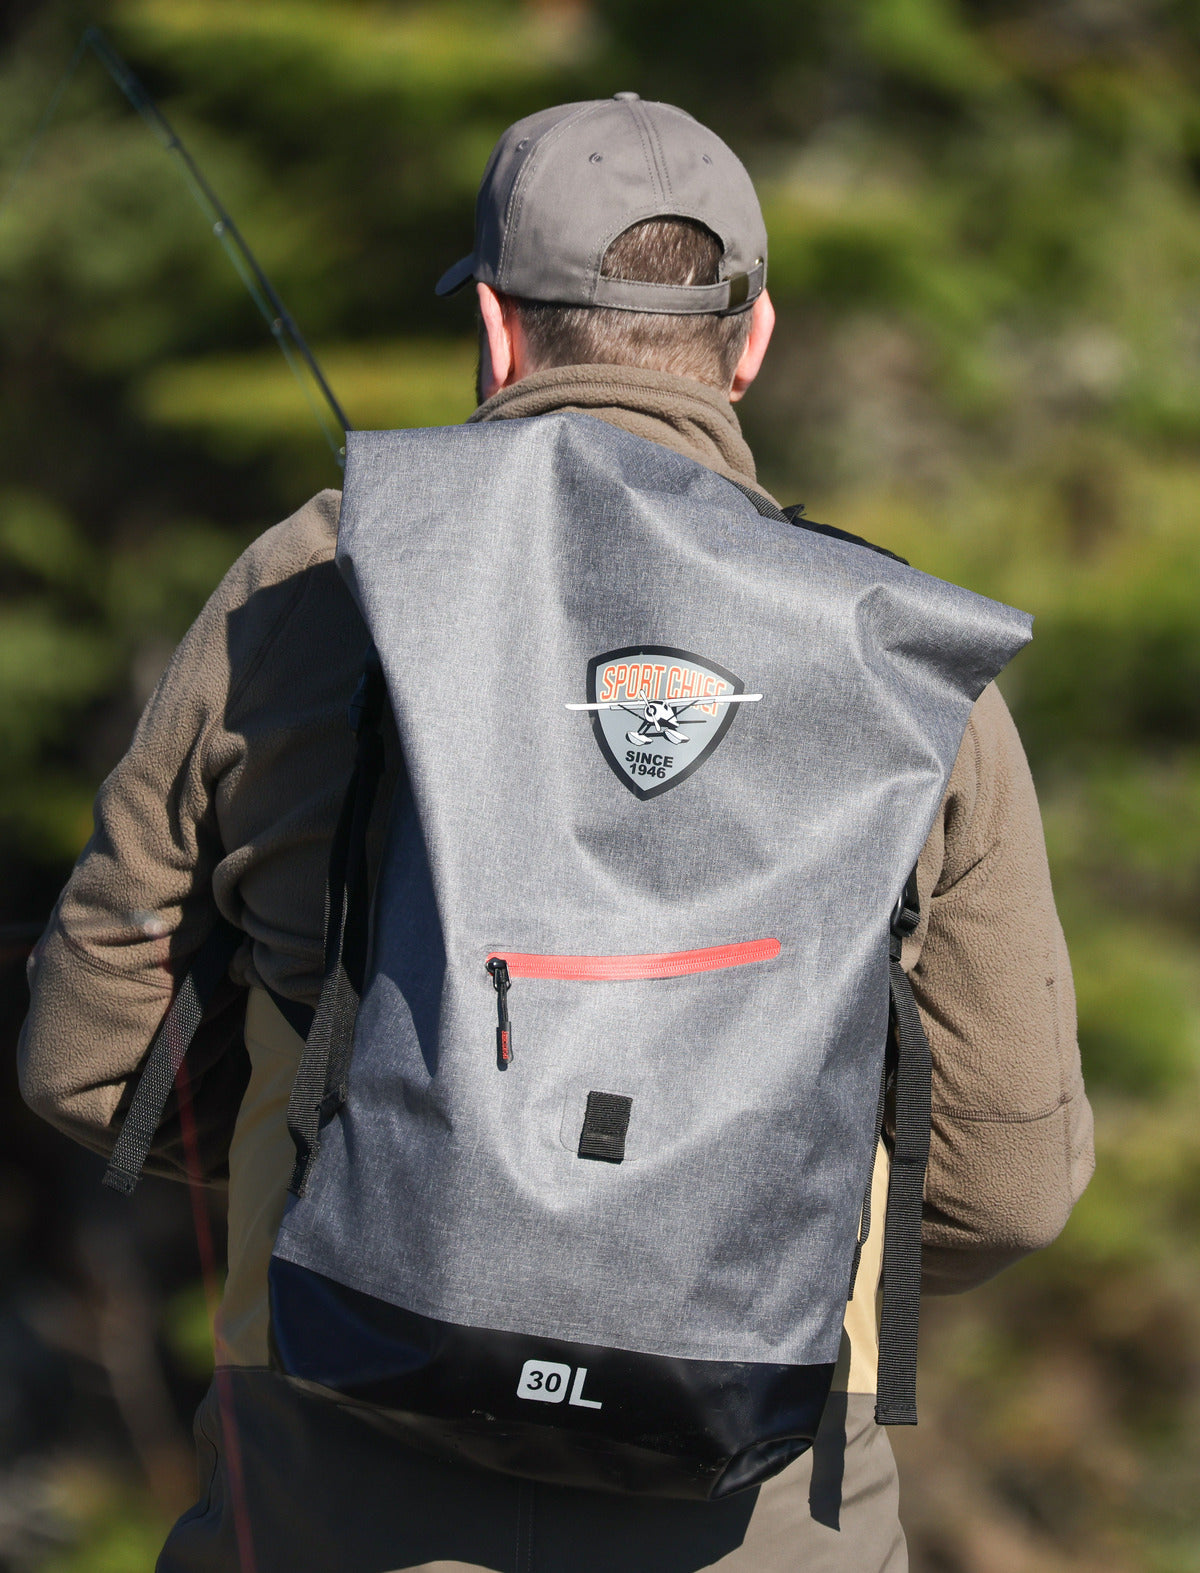 Blazer waterproof and dry fishing backpack – Sportchief